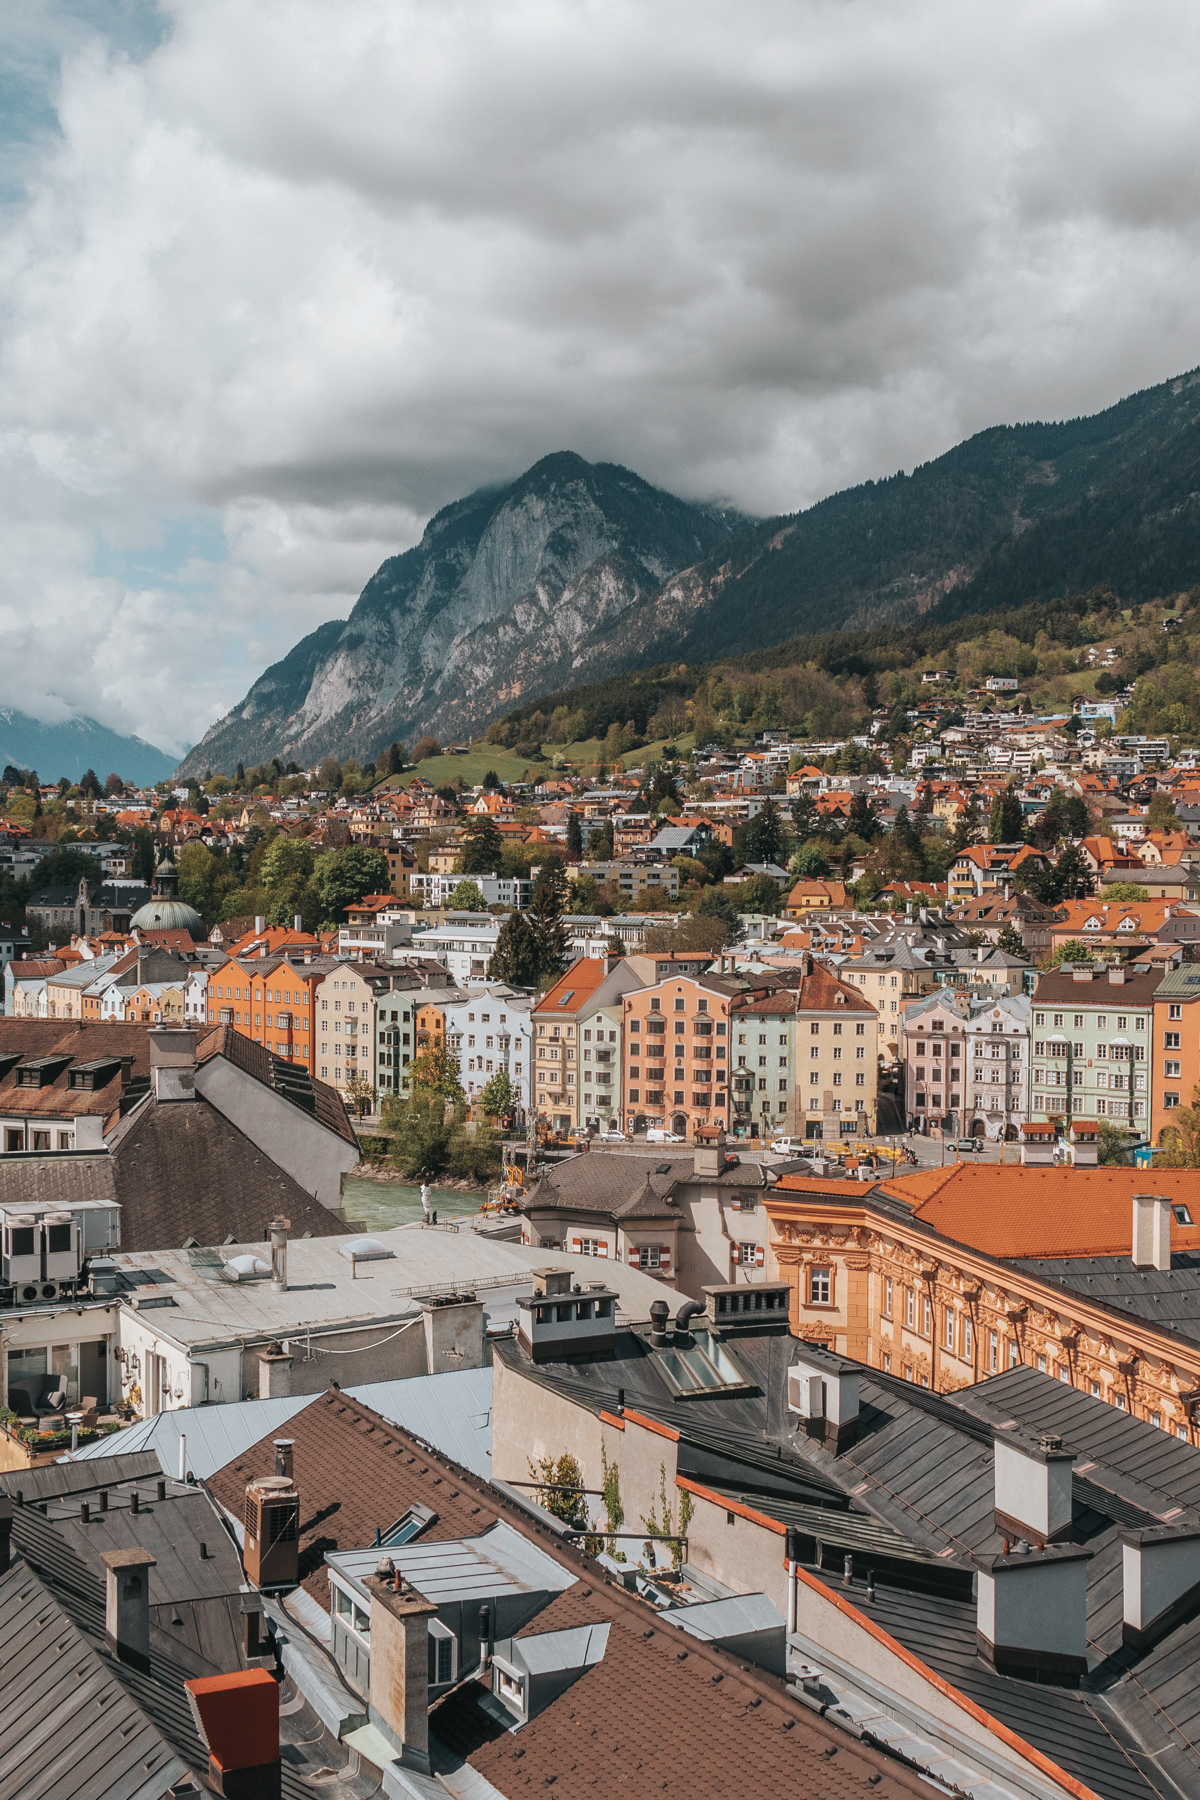 How to Spend One Day in Innsbruck, Austria: Best Budget-Friendly Things to Do